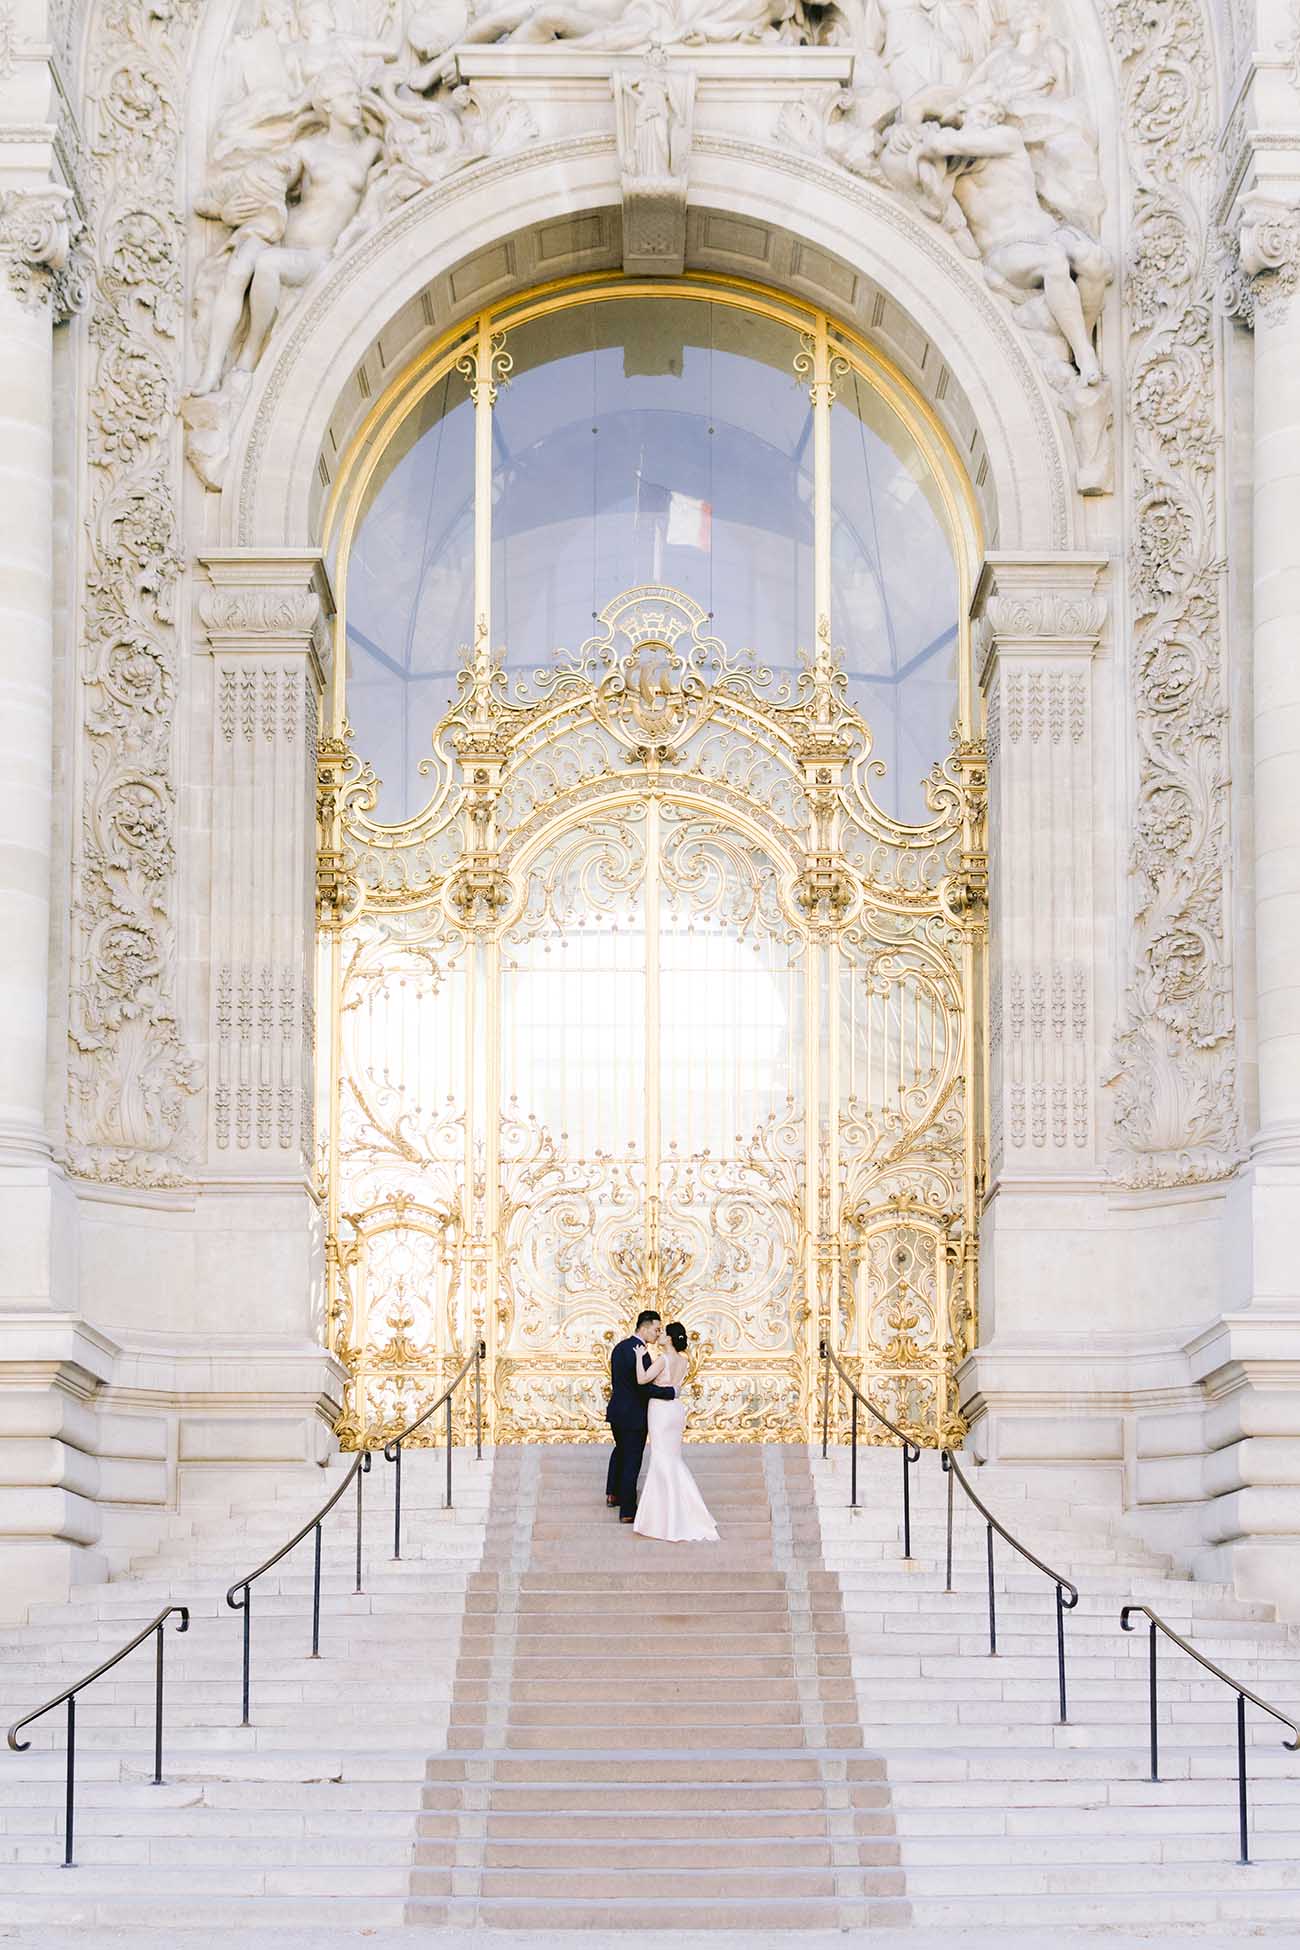  A couple embraces in front of the magnificent golden door of the Petit Palais in Paris